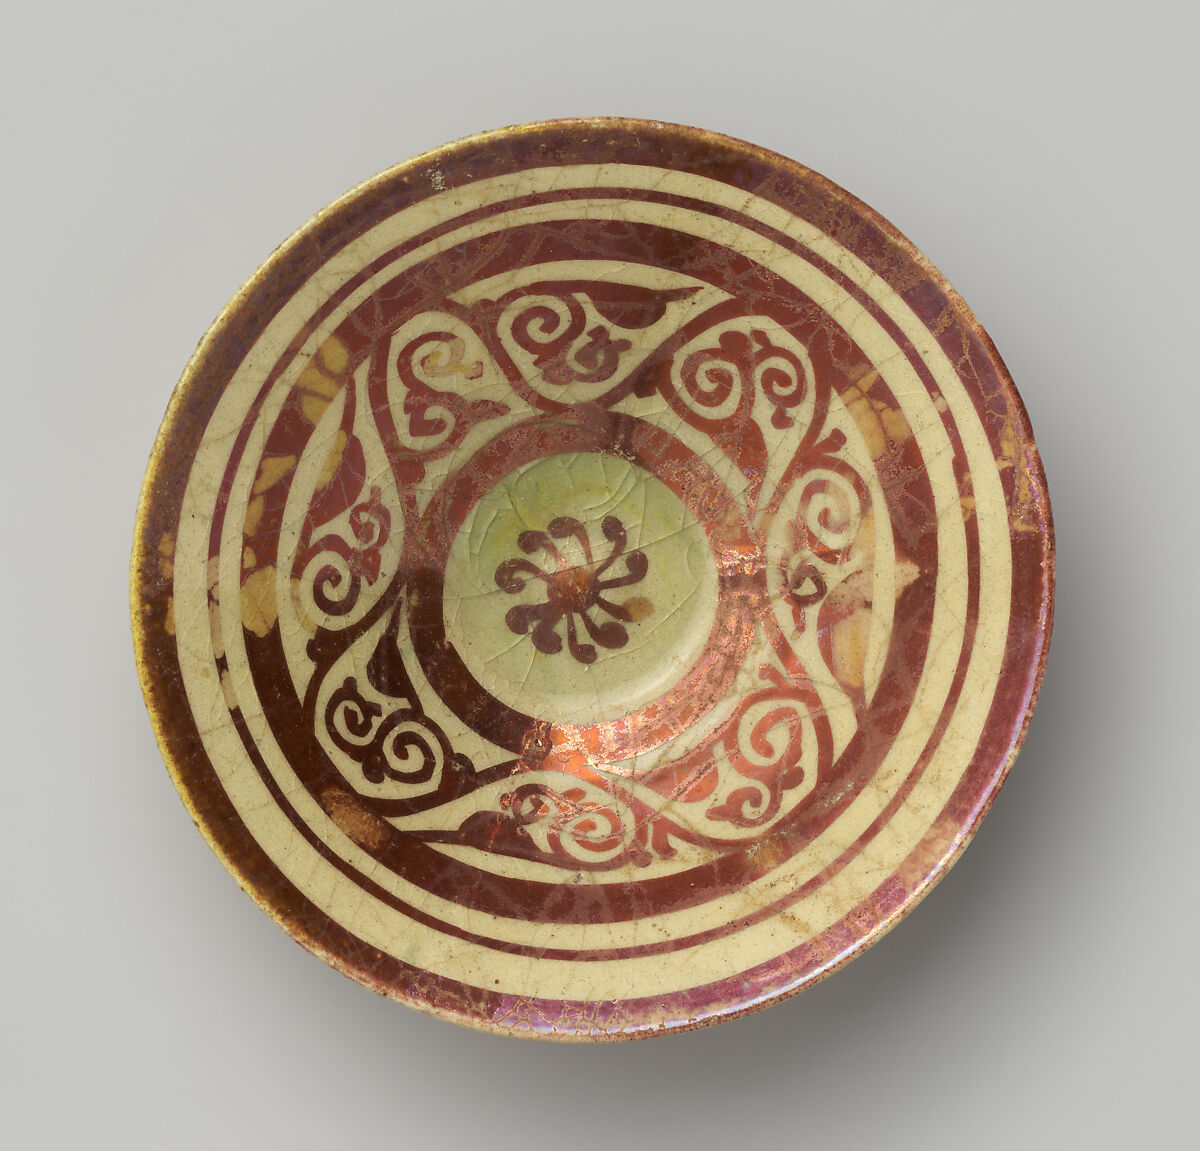 "Tell Minis" Bowl with Vegetal Scroll, Stonepaste; luster-painted on transparent glaze 